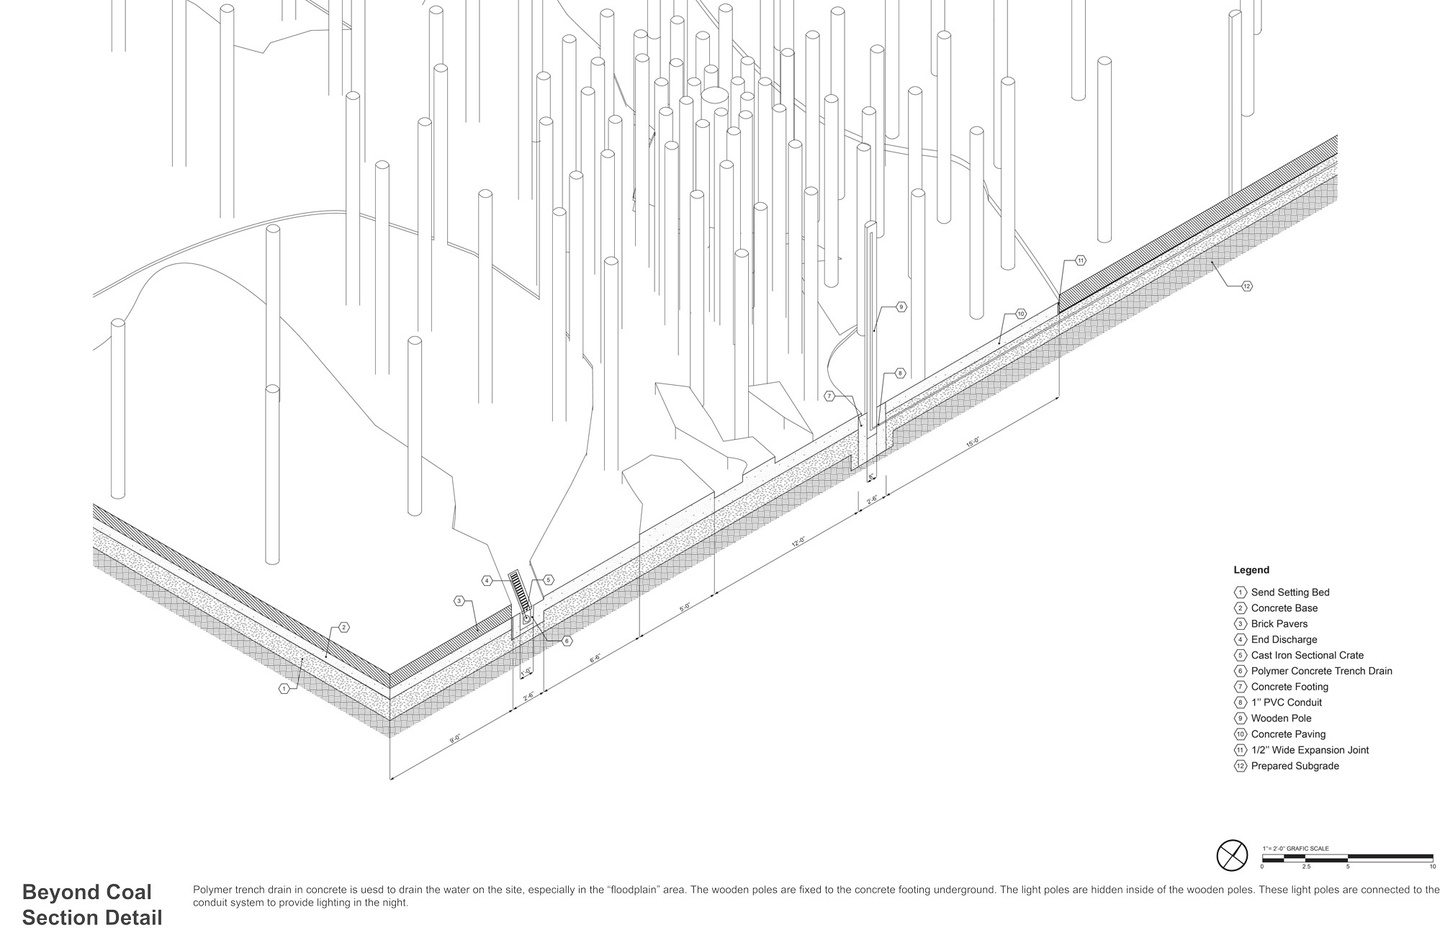 Section detail with multiple vertical poles 